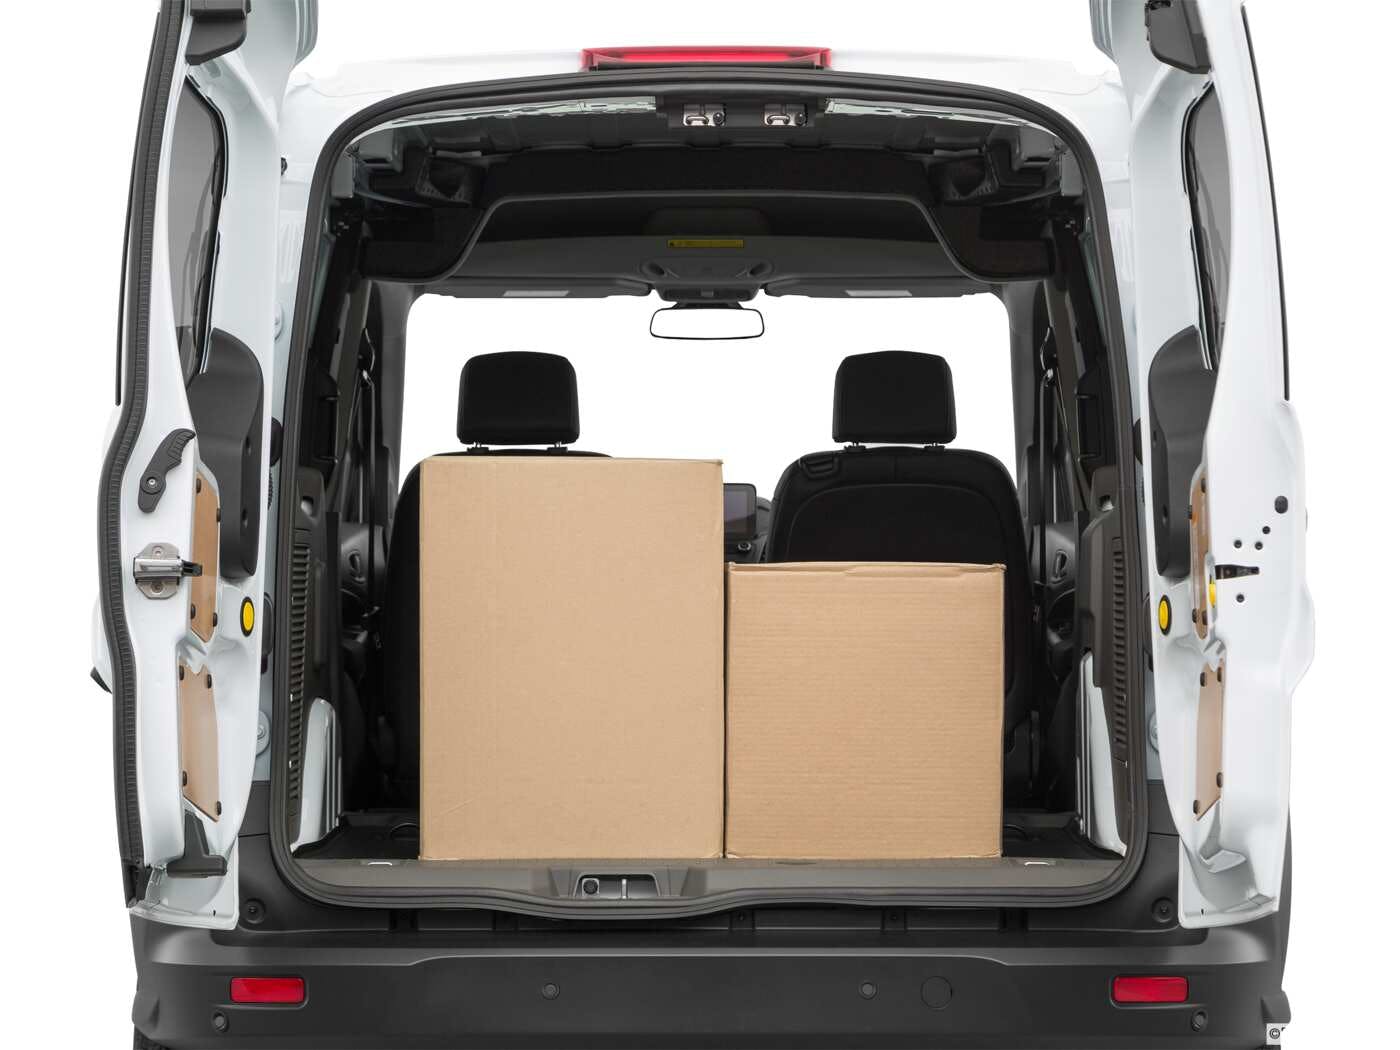 2020 Ford Transit Connect Van Review